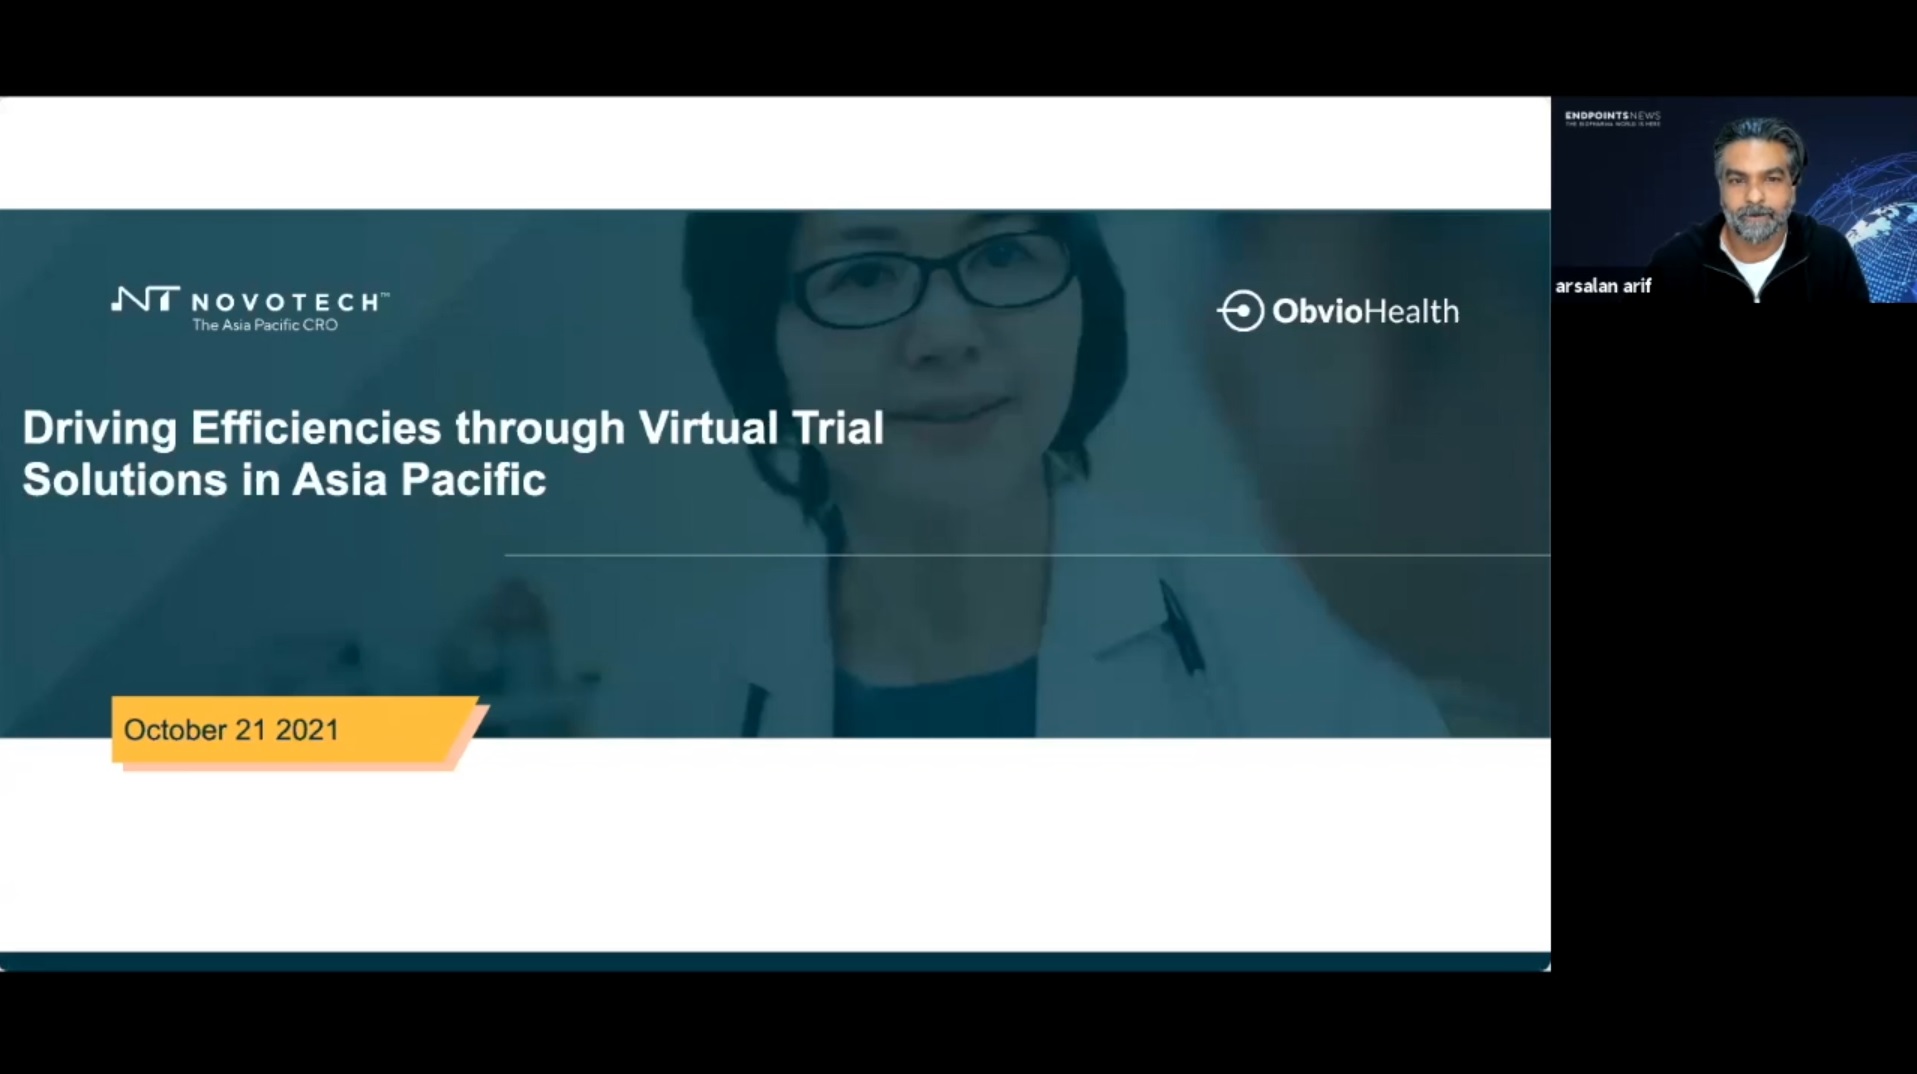 Driving efficiencies through virtual trial solutions in Asia Pacific